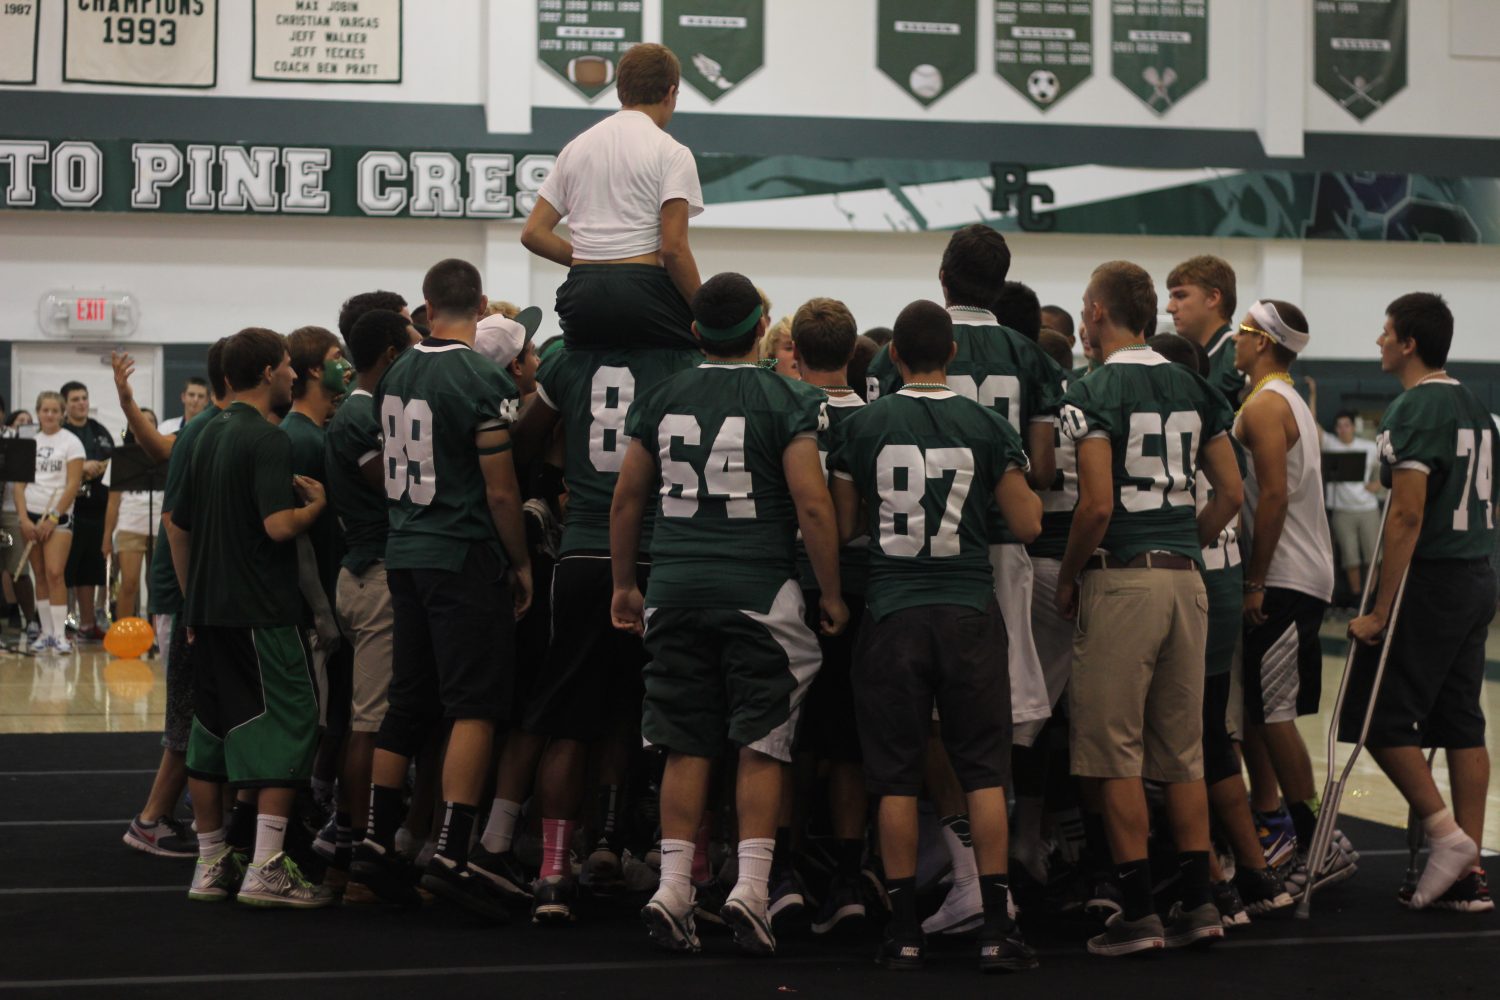 The Panthers Football Team does their pre-game ritual at the Homecoming Pep Rally.